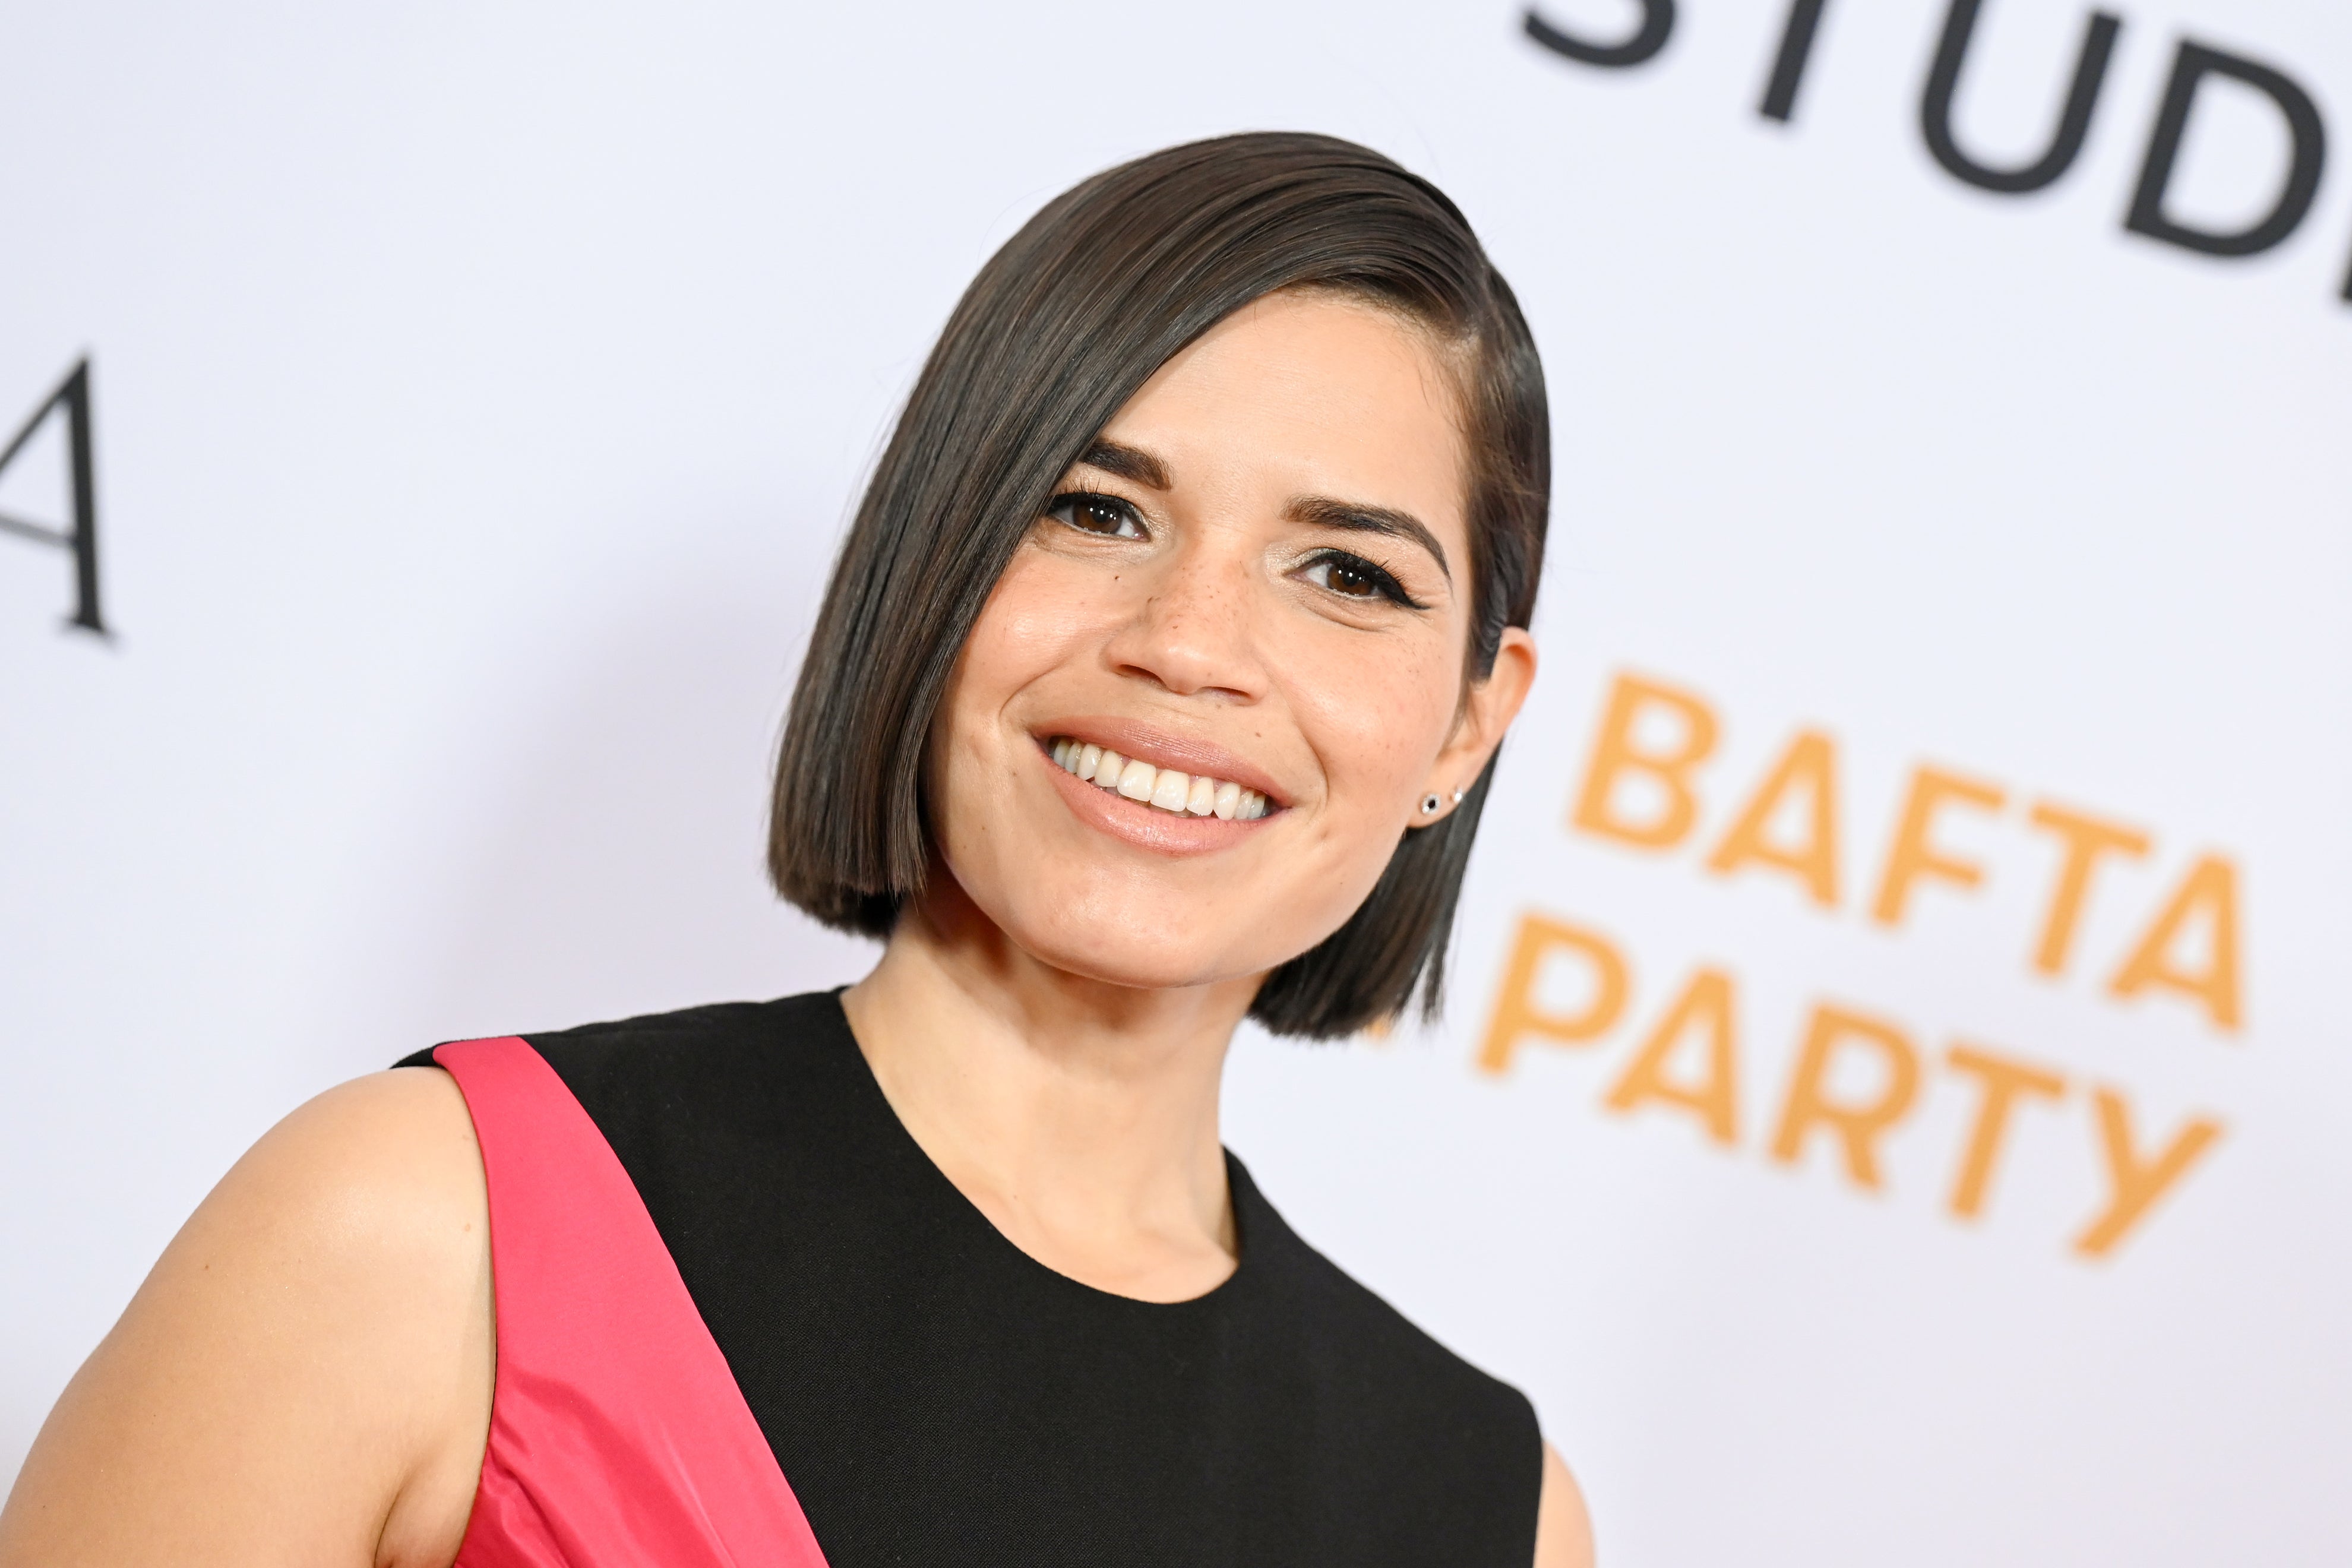 Here's What America Ferrera Thinks About The Fact That She's Nominated For An Oscar For "Barbie," But Greta Gerwig And Margo Robbie Aren't